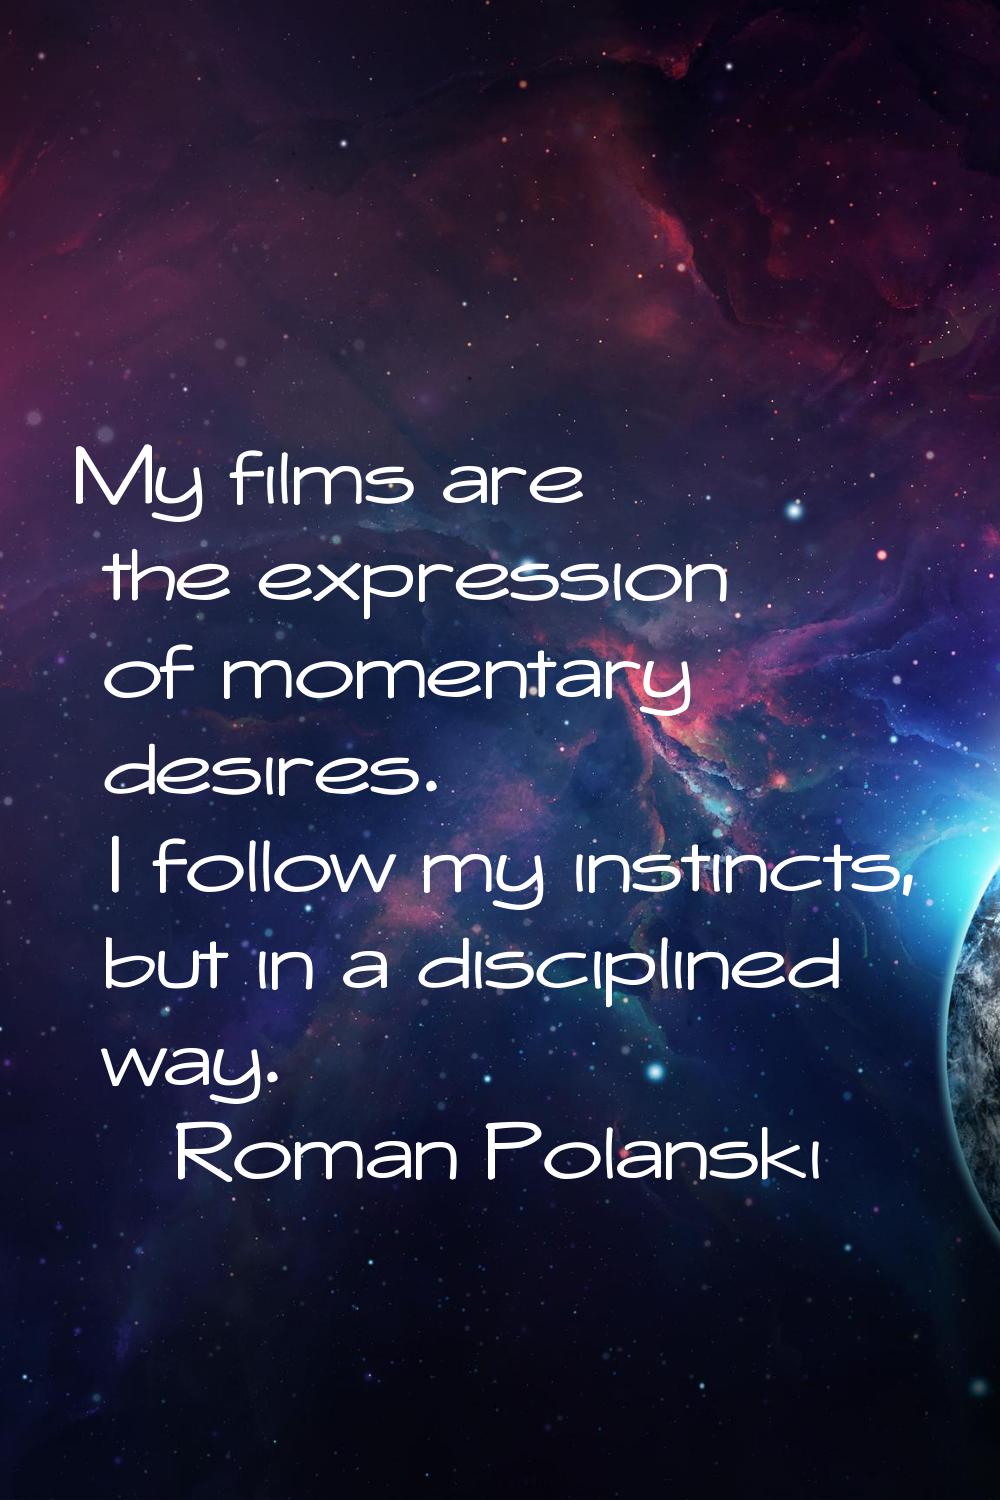 My films are the expression of momentary desires. I follow my instincts, but in a disciplined way.